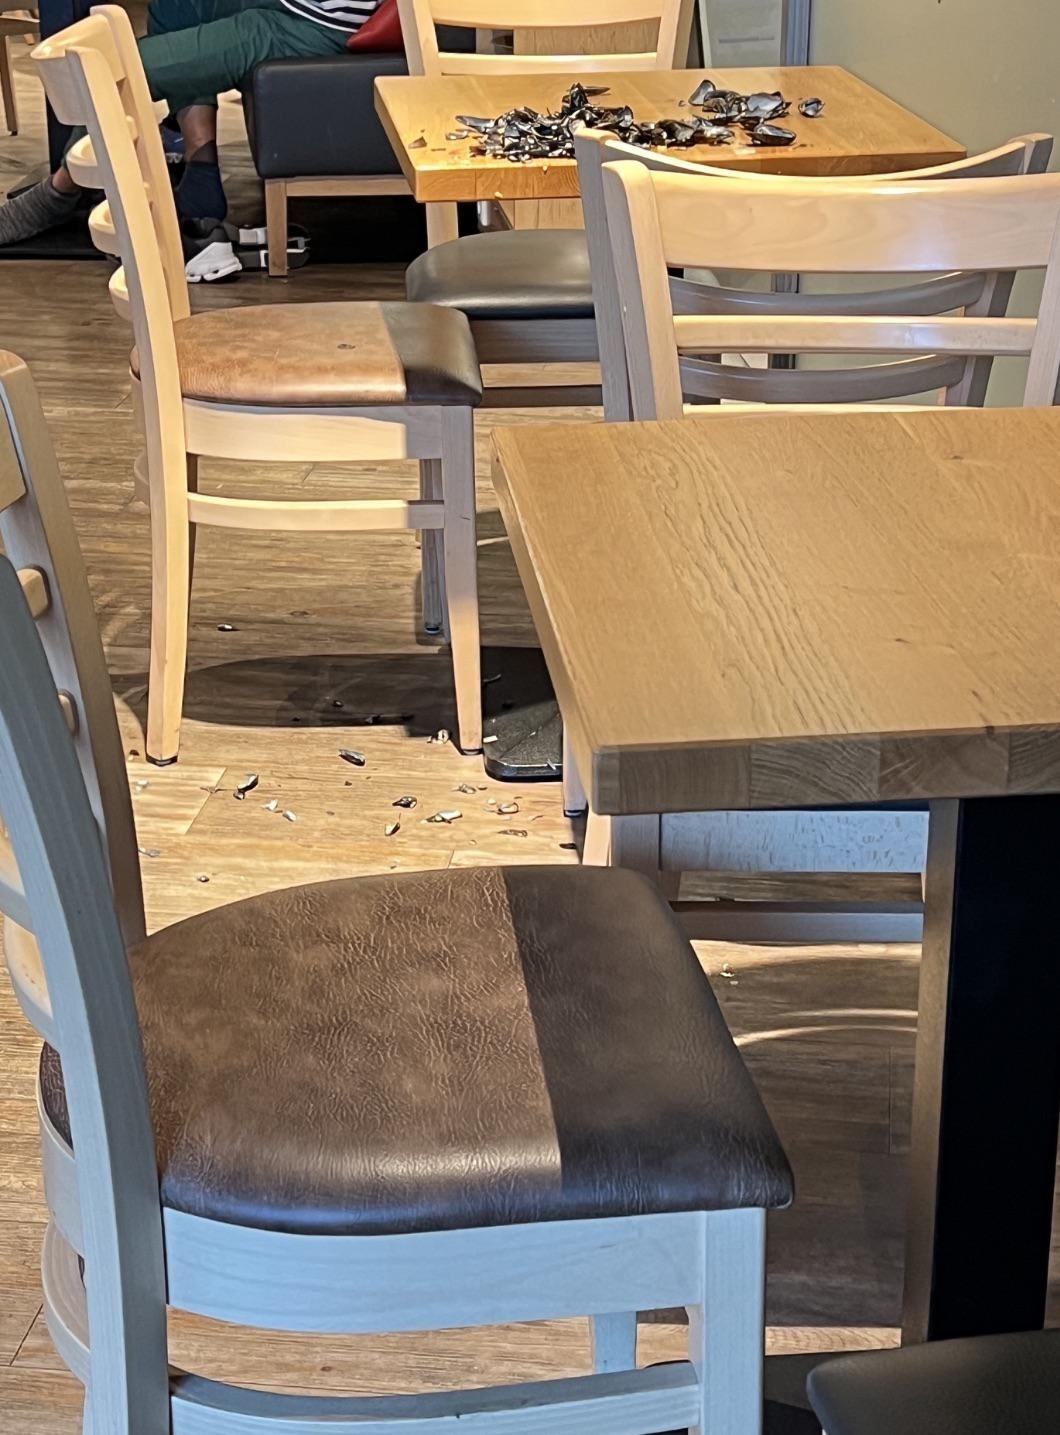 Empty diner chairs and scattered mussel shells on the floor and on the table